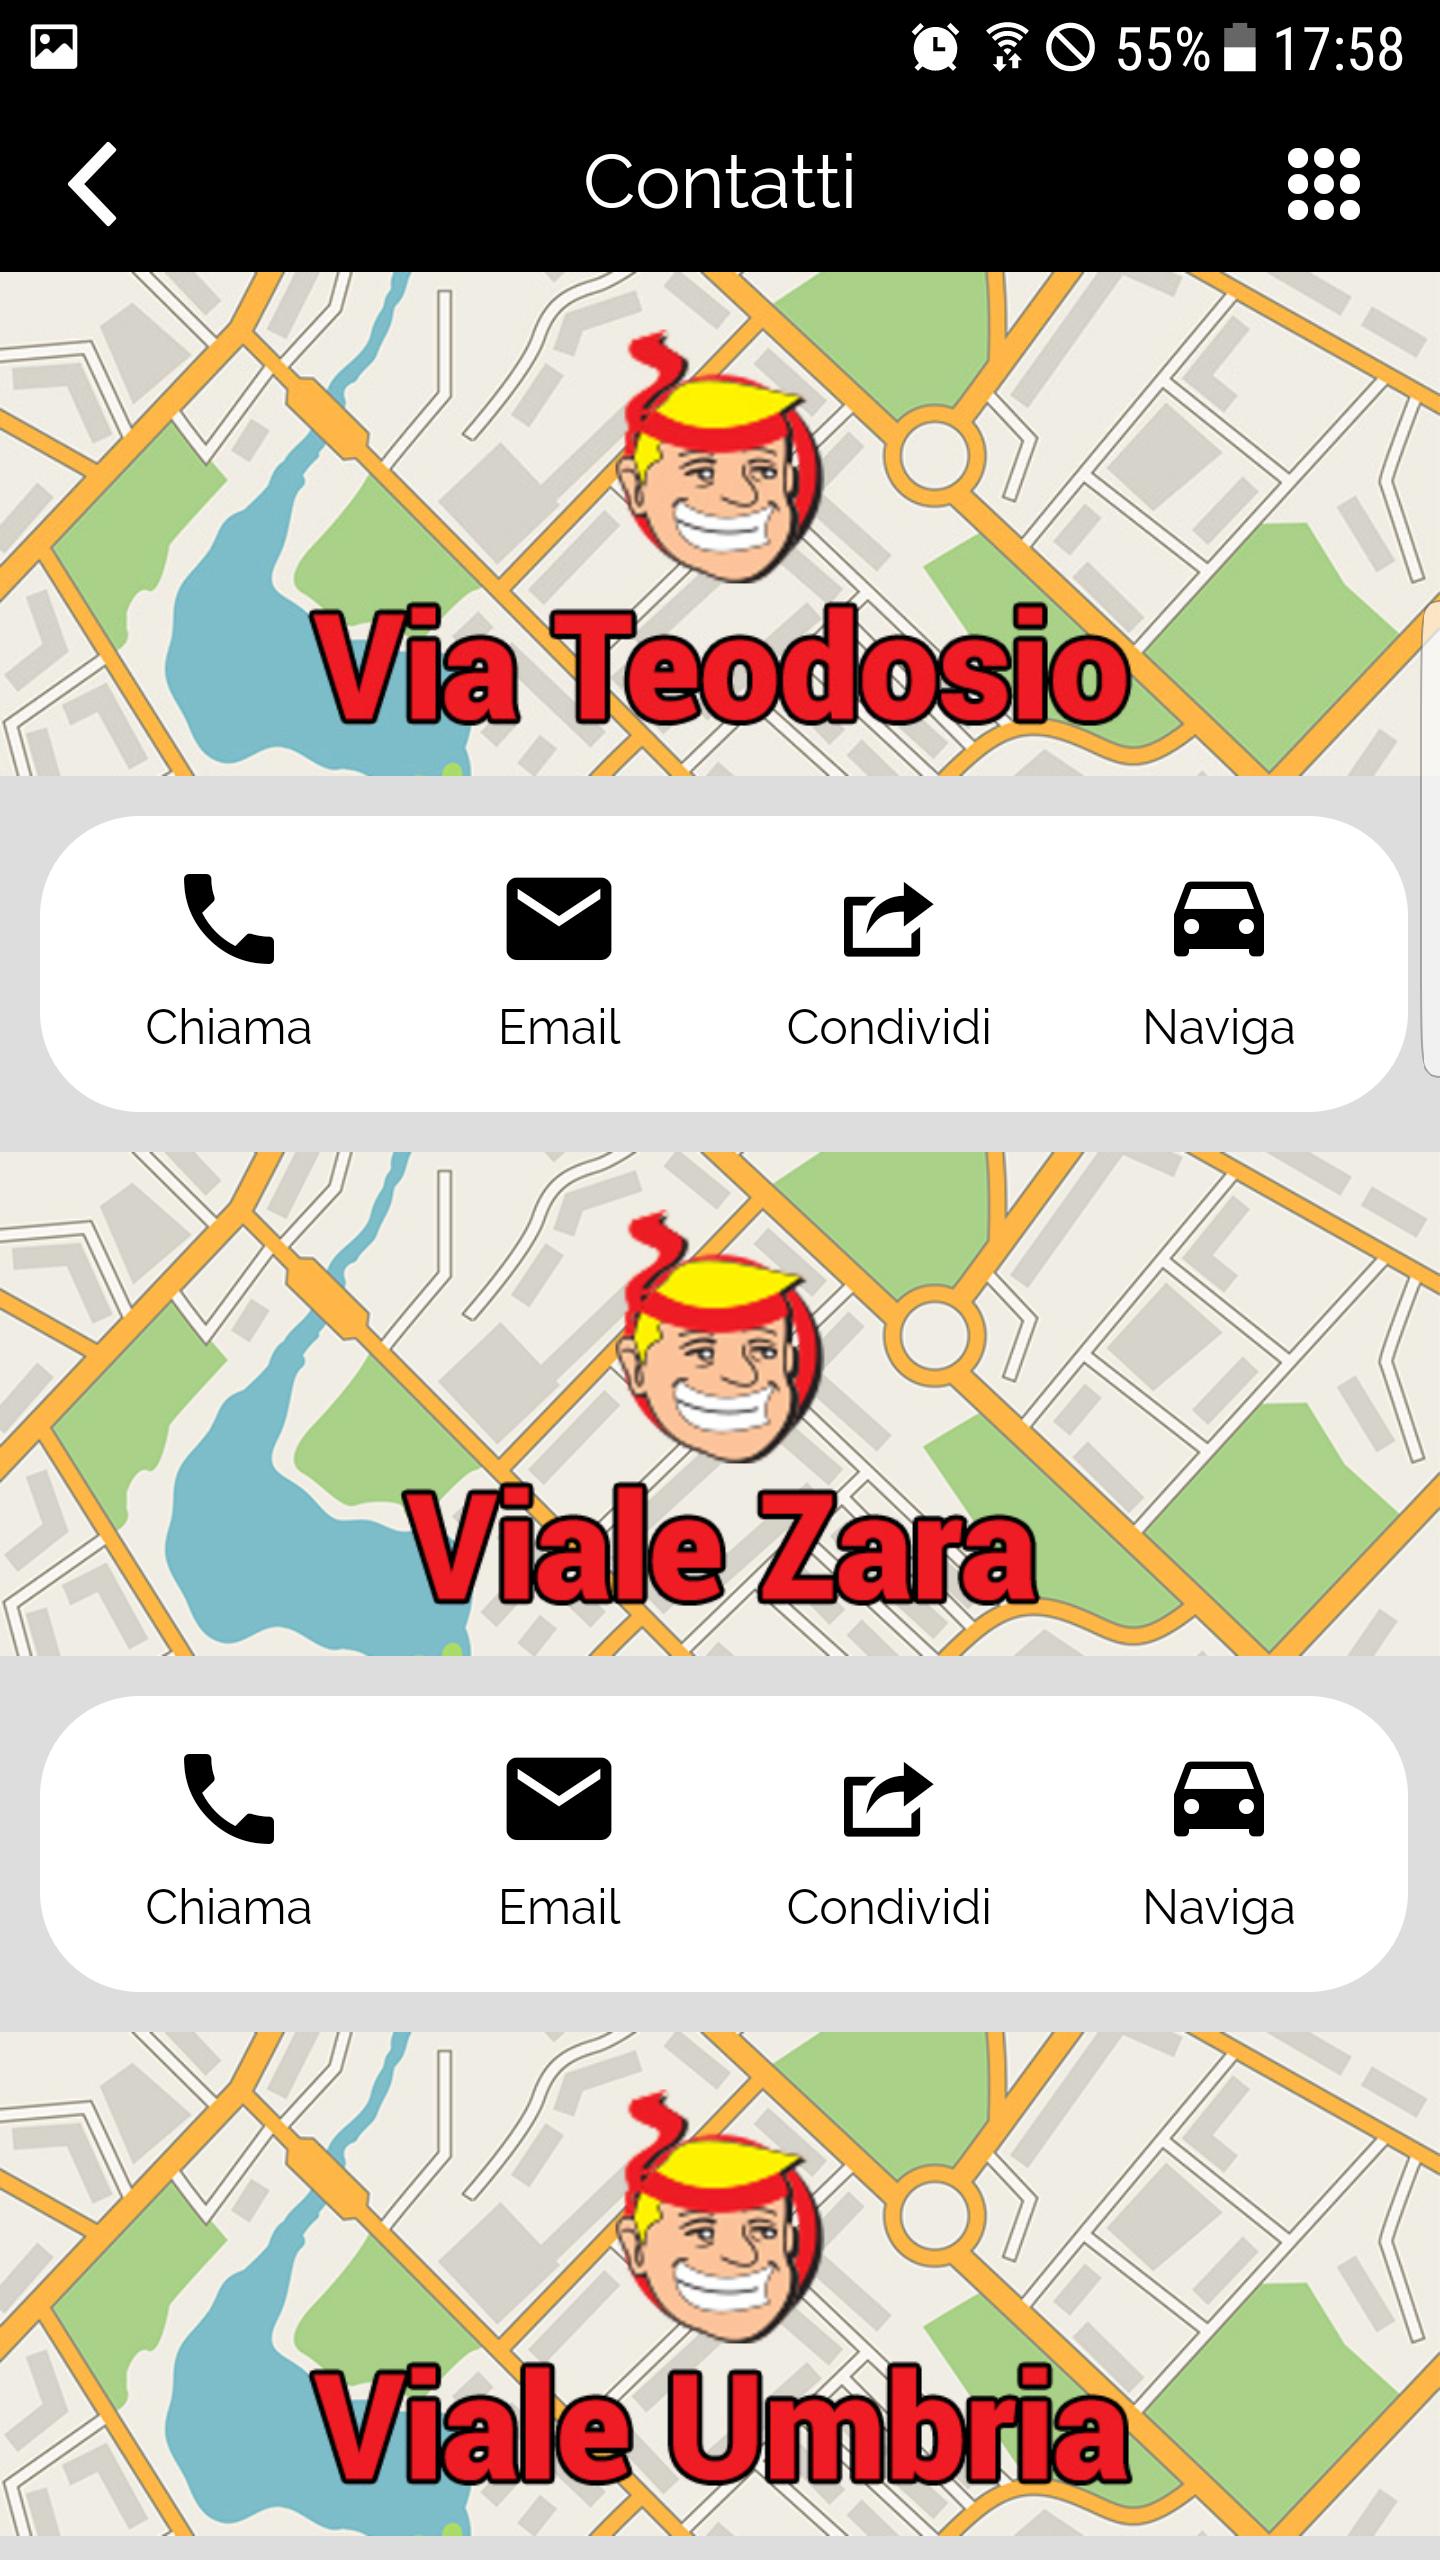 Ciccio Pizza for Android - APK Download